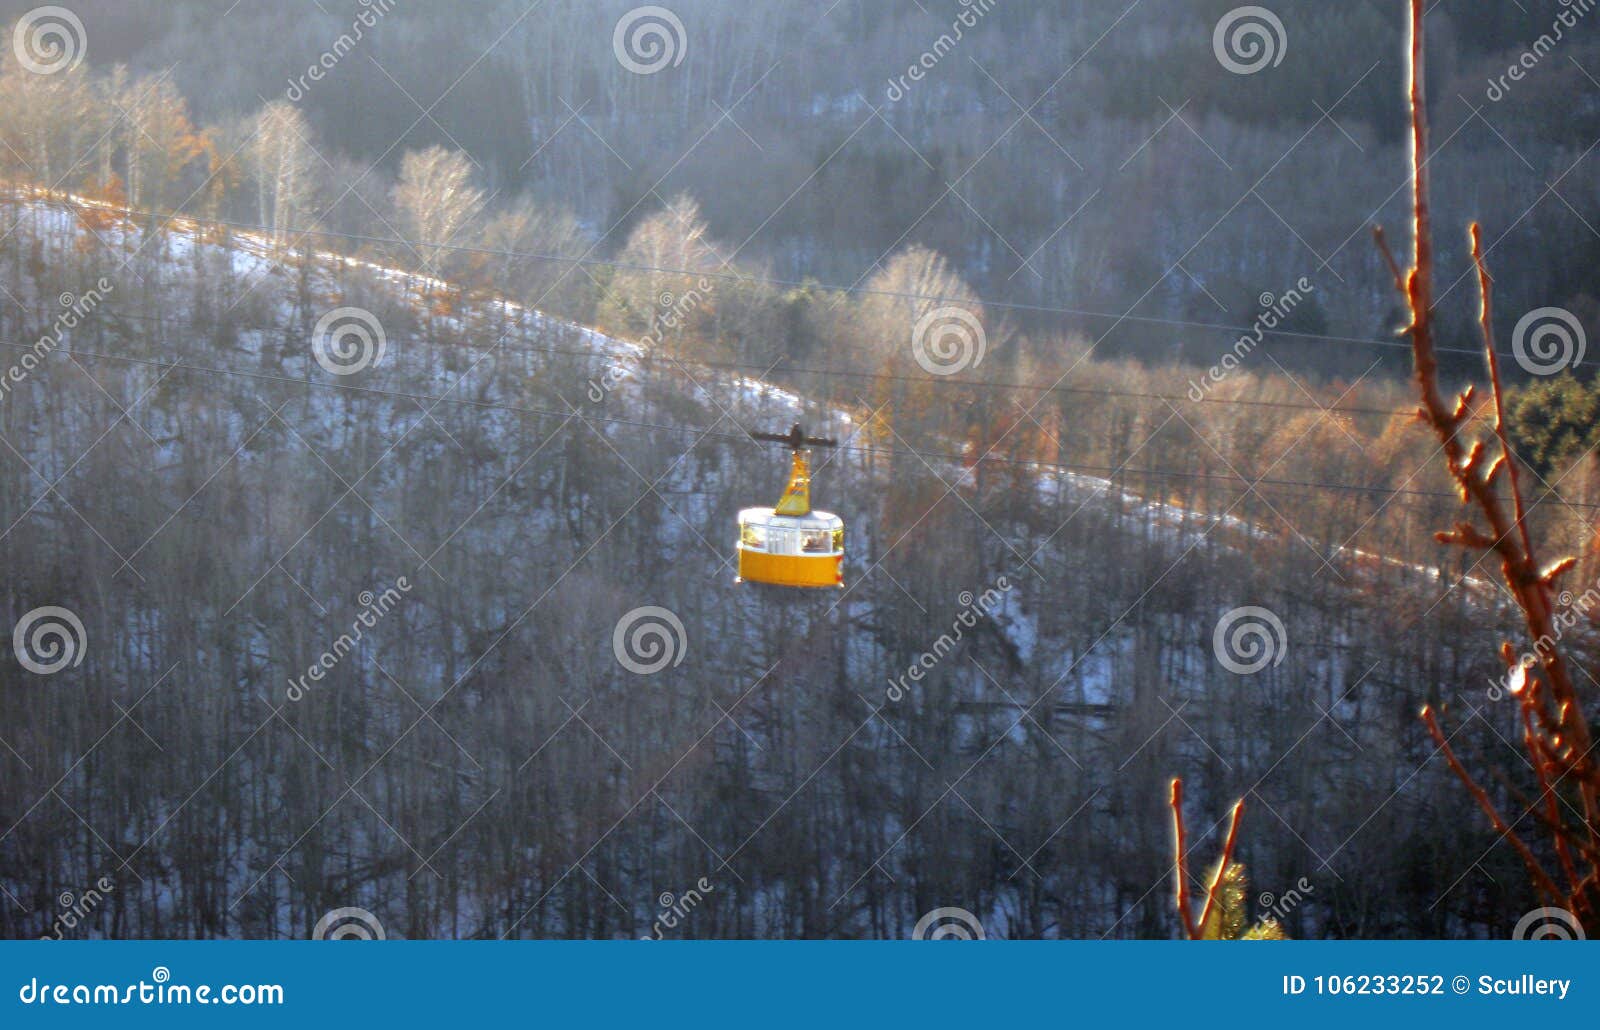 cableway and caucas mountains winter time russian federation